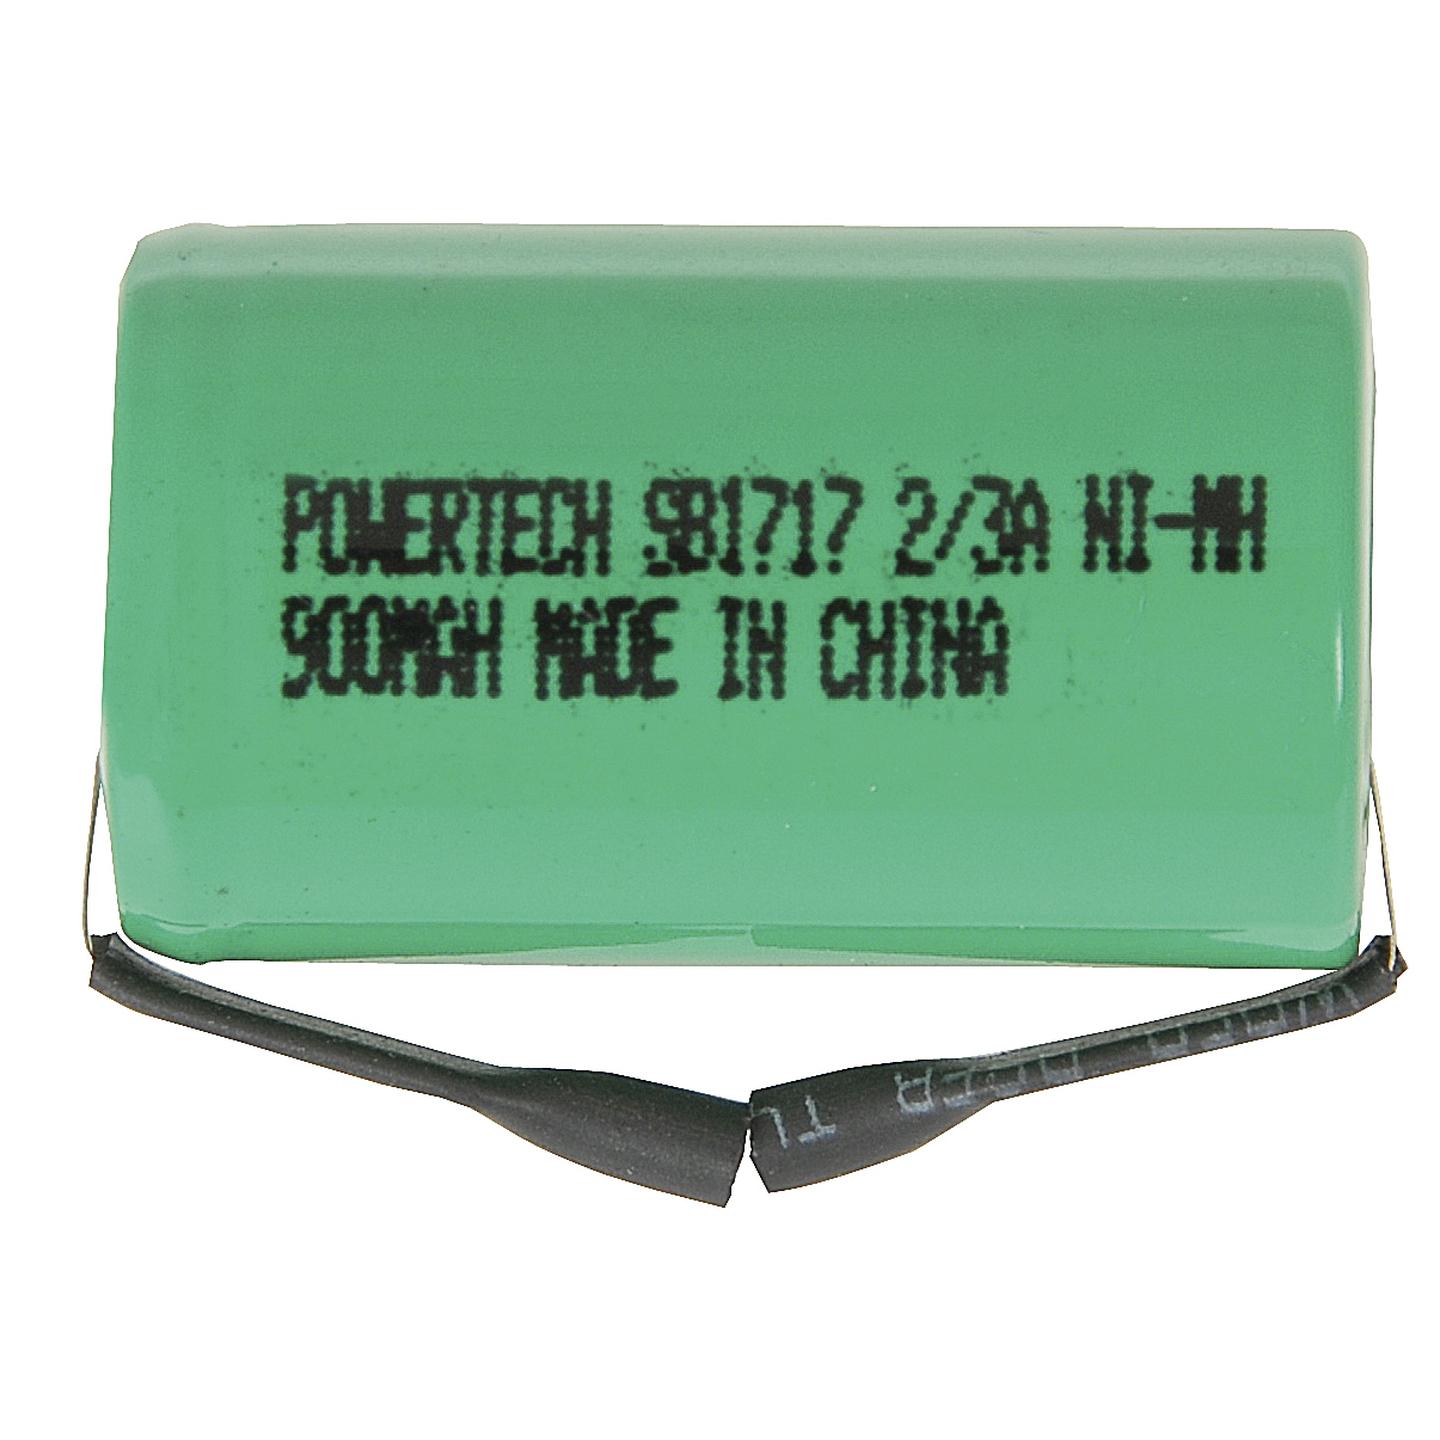 1.2V 2/3A Size Ni-MH Rechargeable Battery - 900mAH